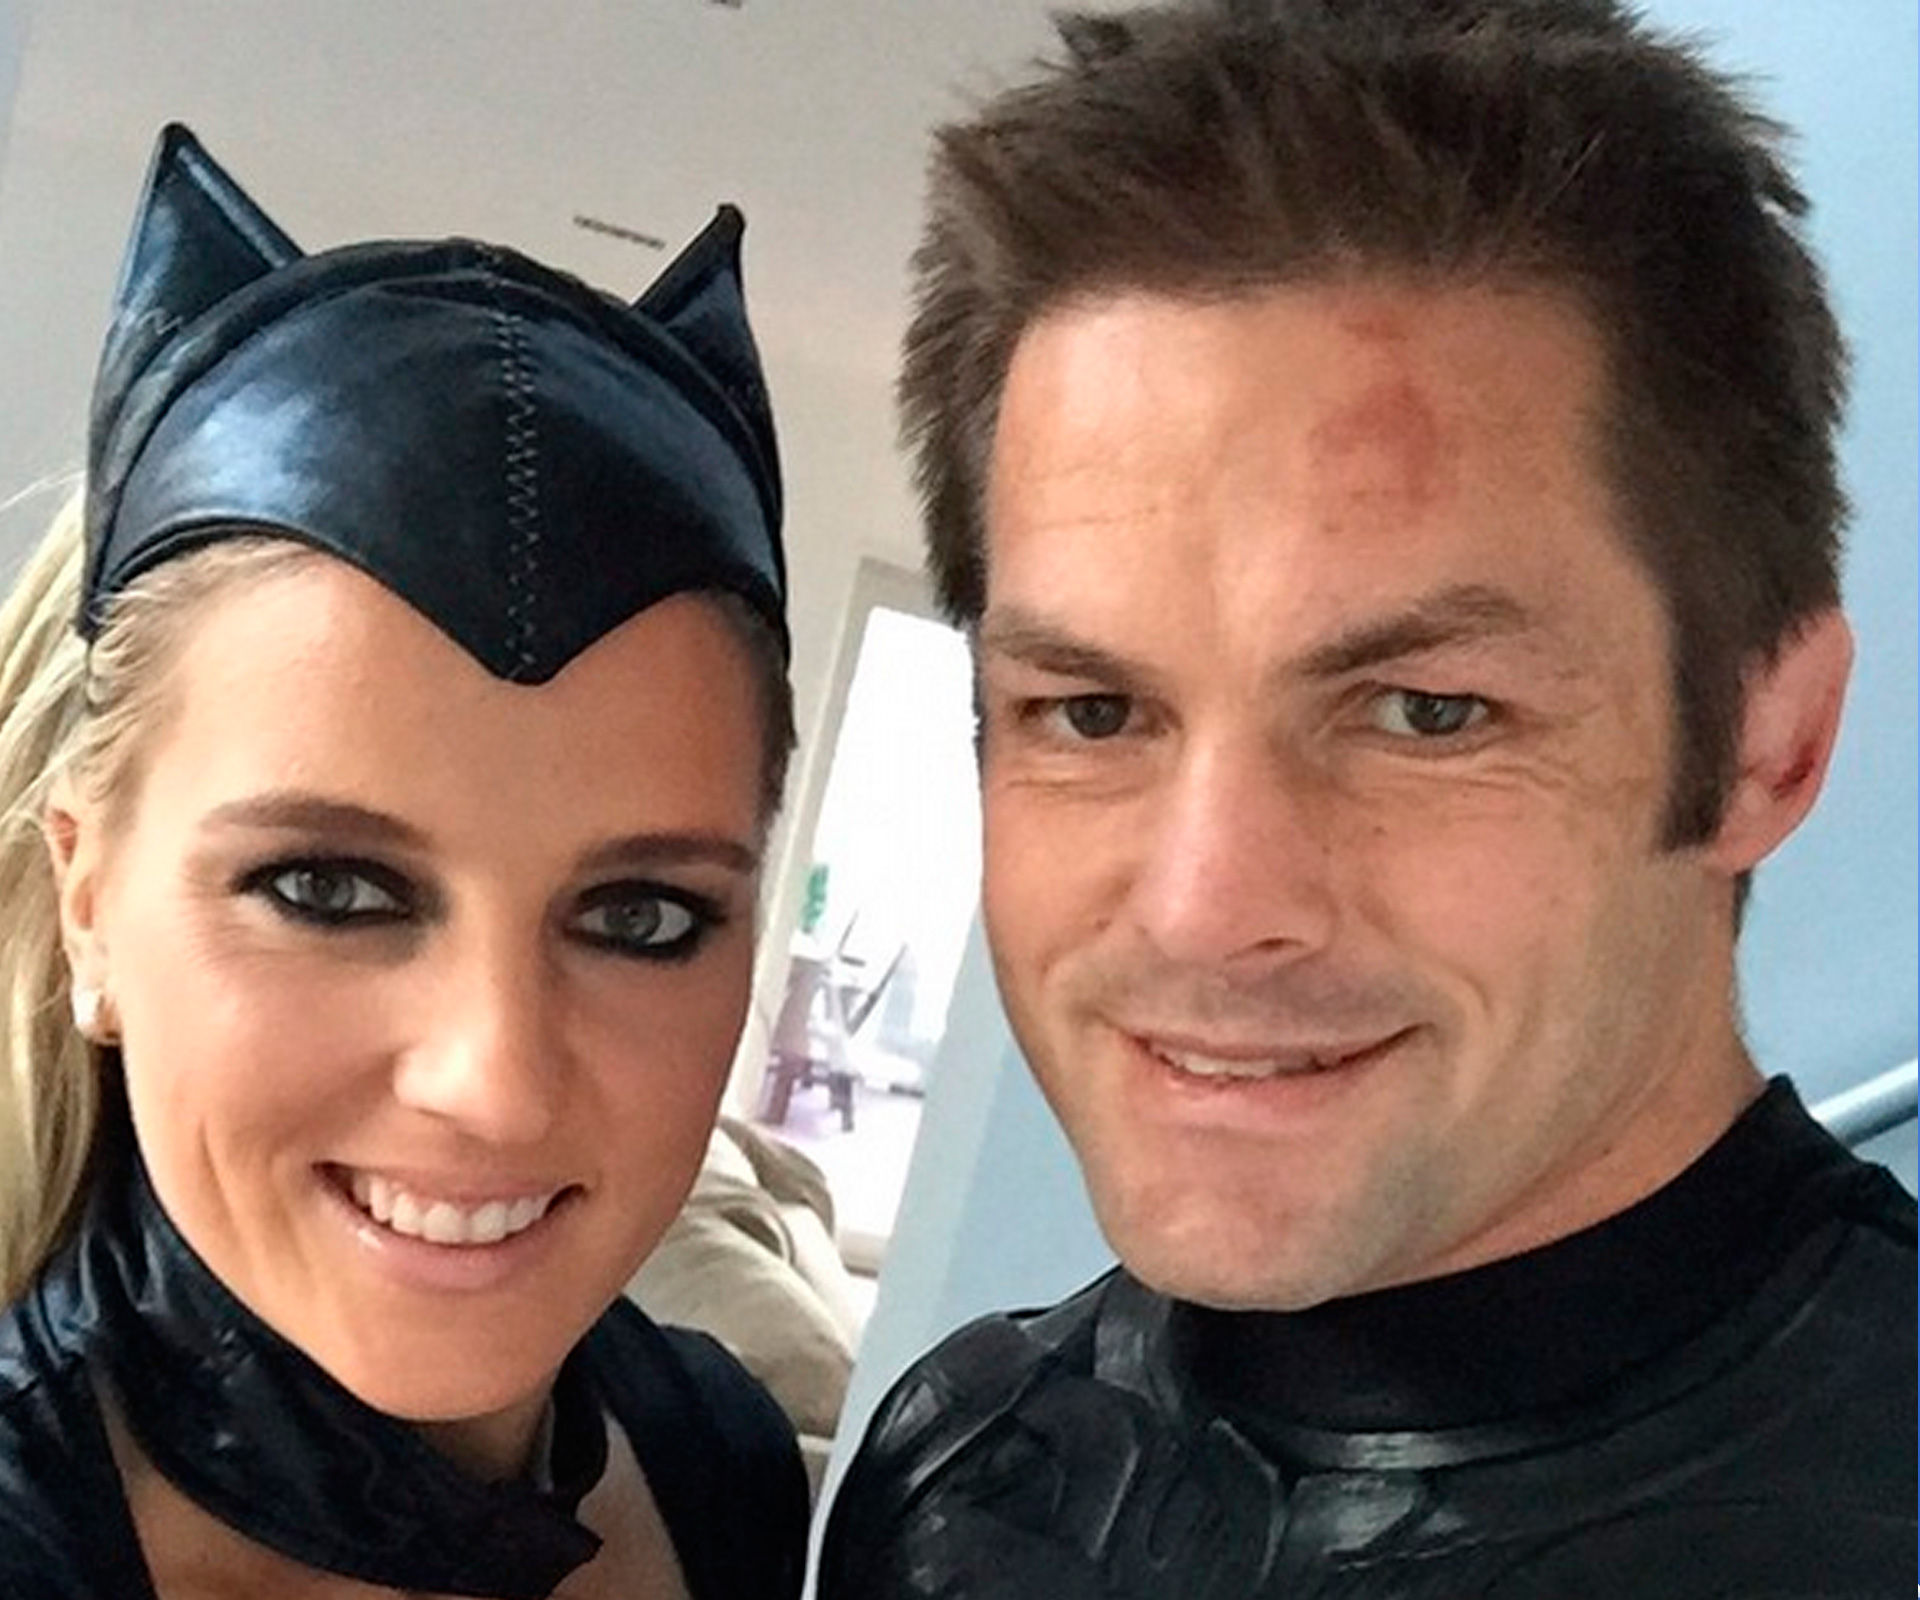 Richie McCaw and Gemma Flynn suit up!